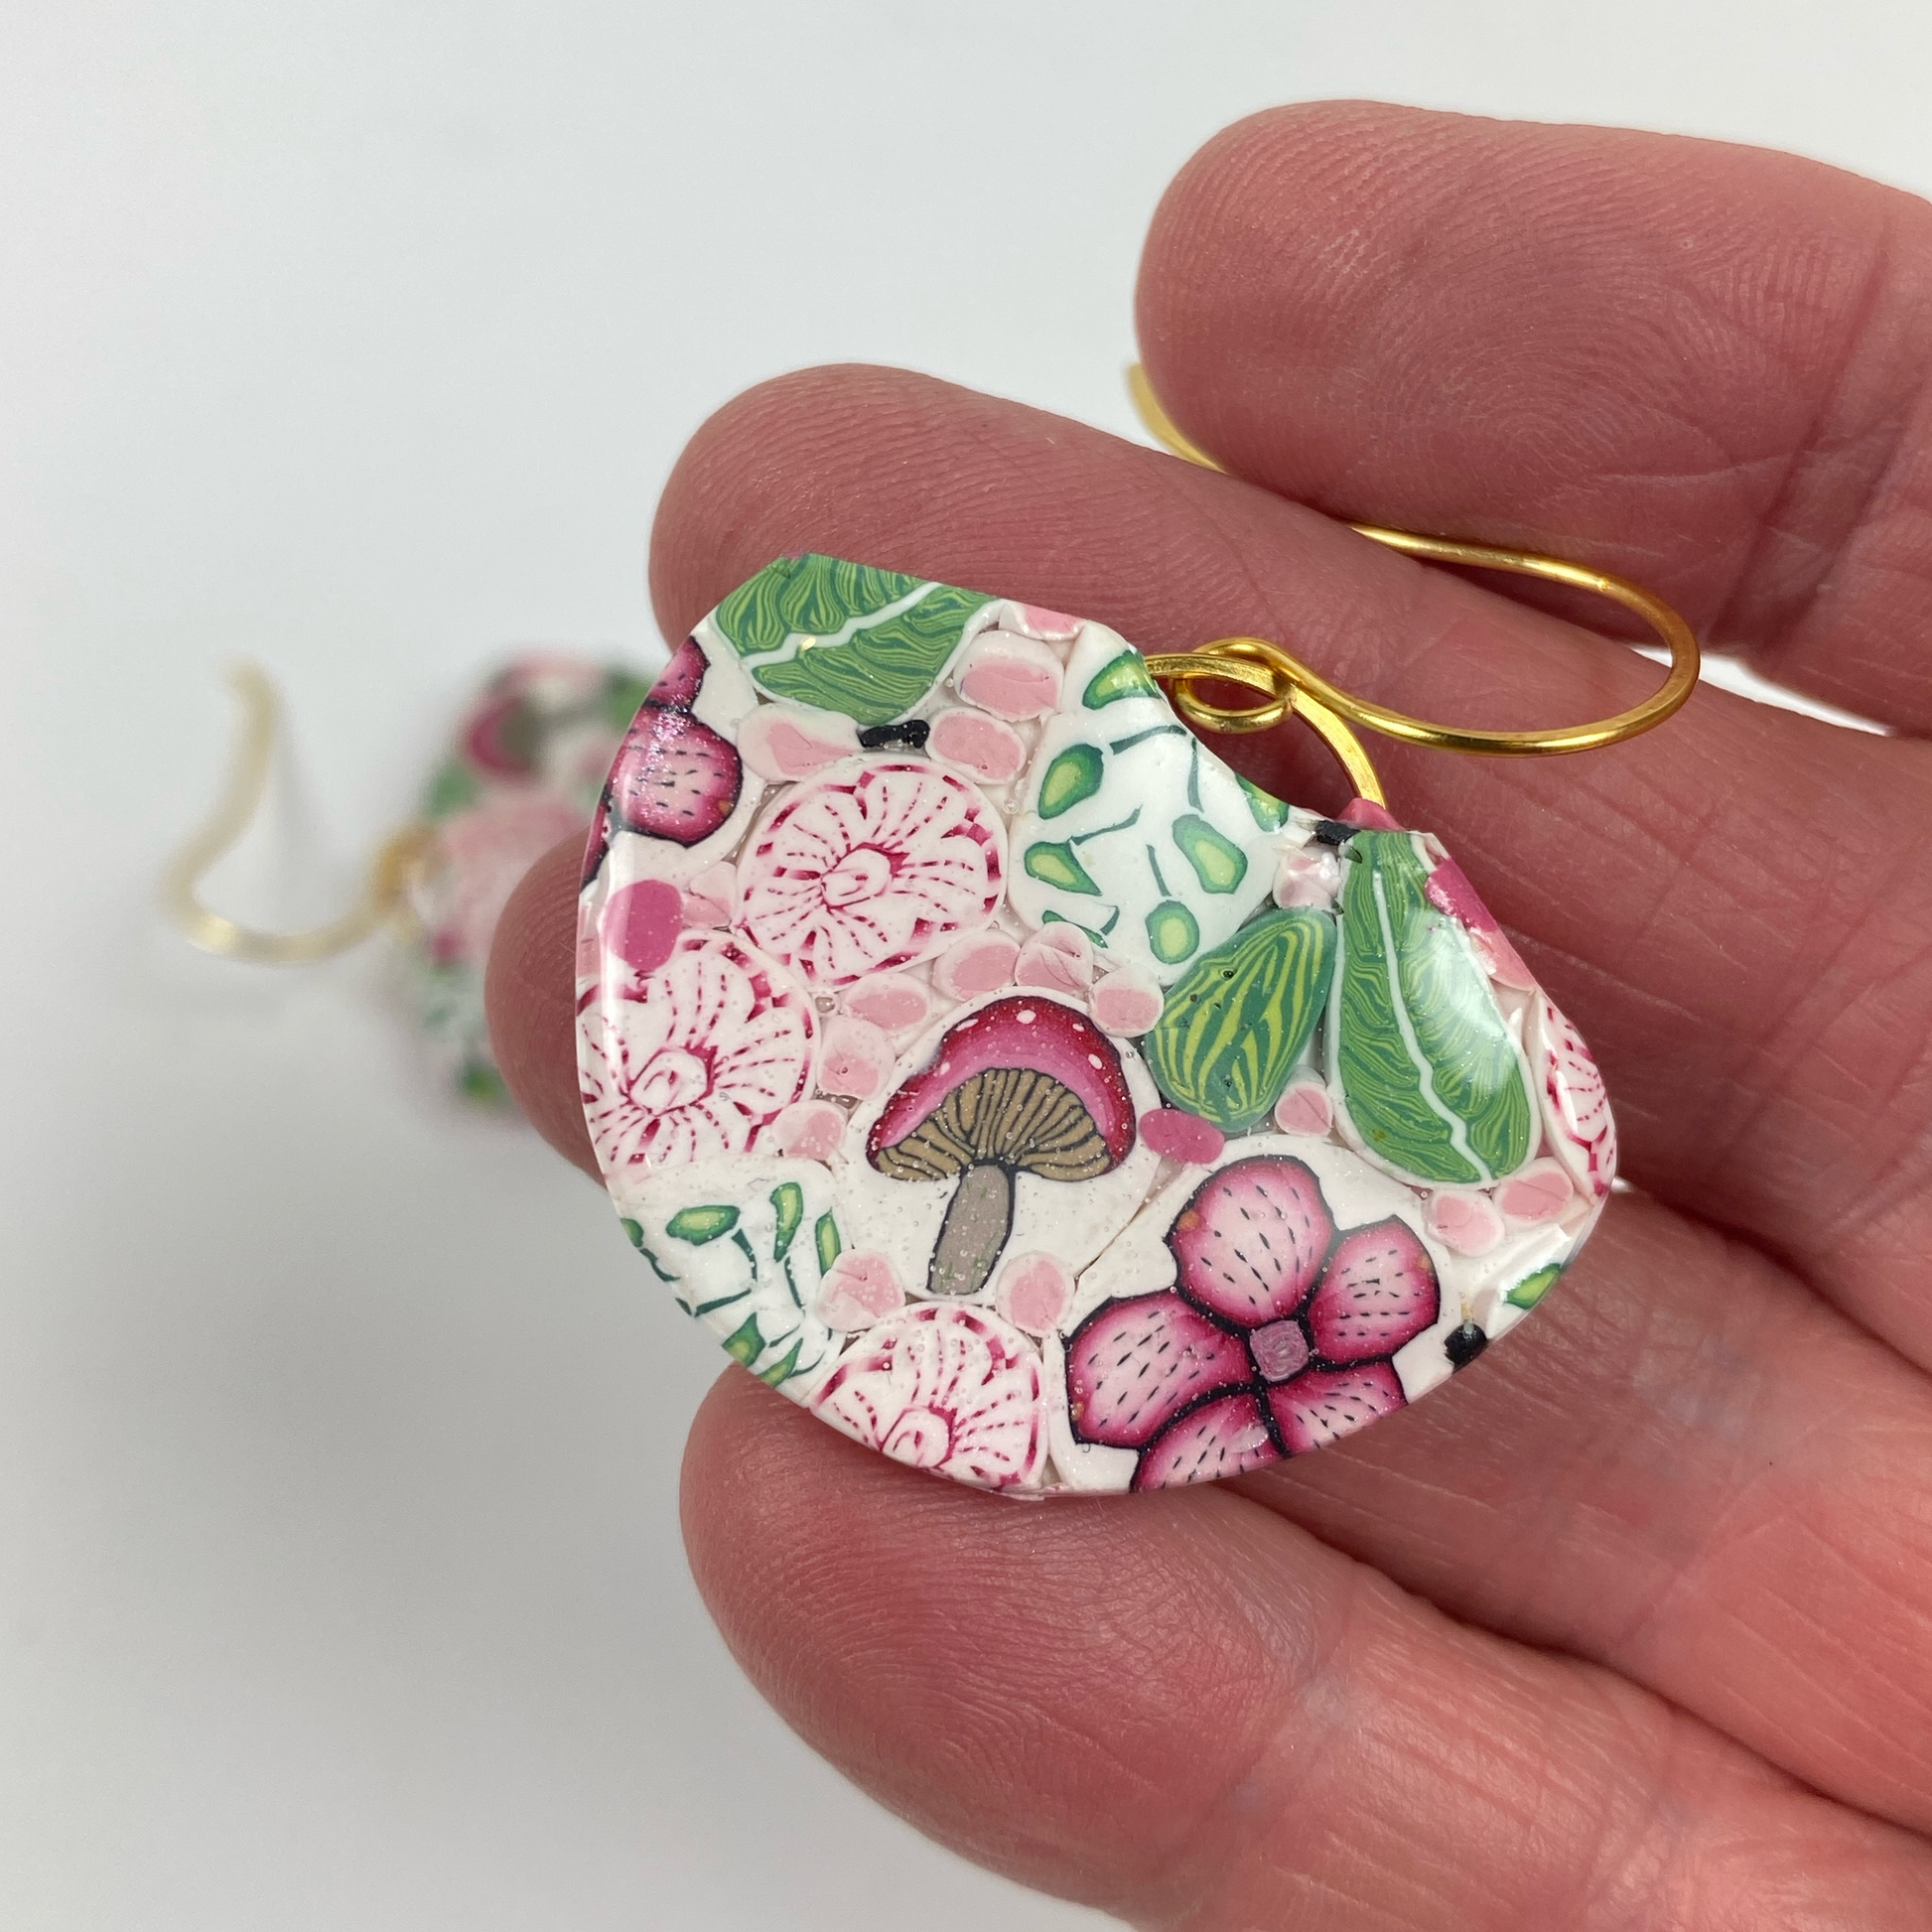 Pink Woodlands Handmade Polymer Clay Dangle Earrings handheld for size reference